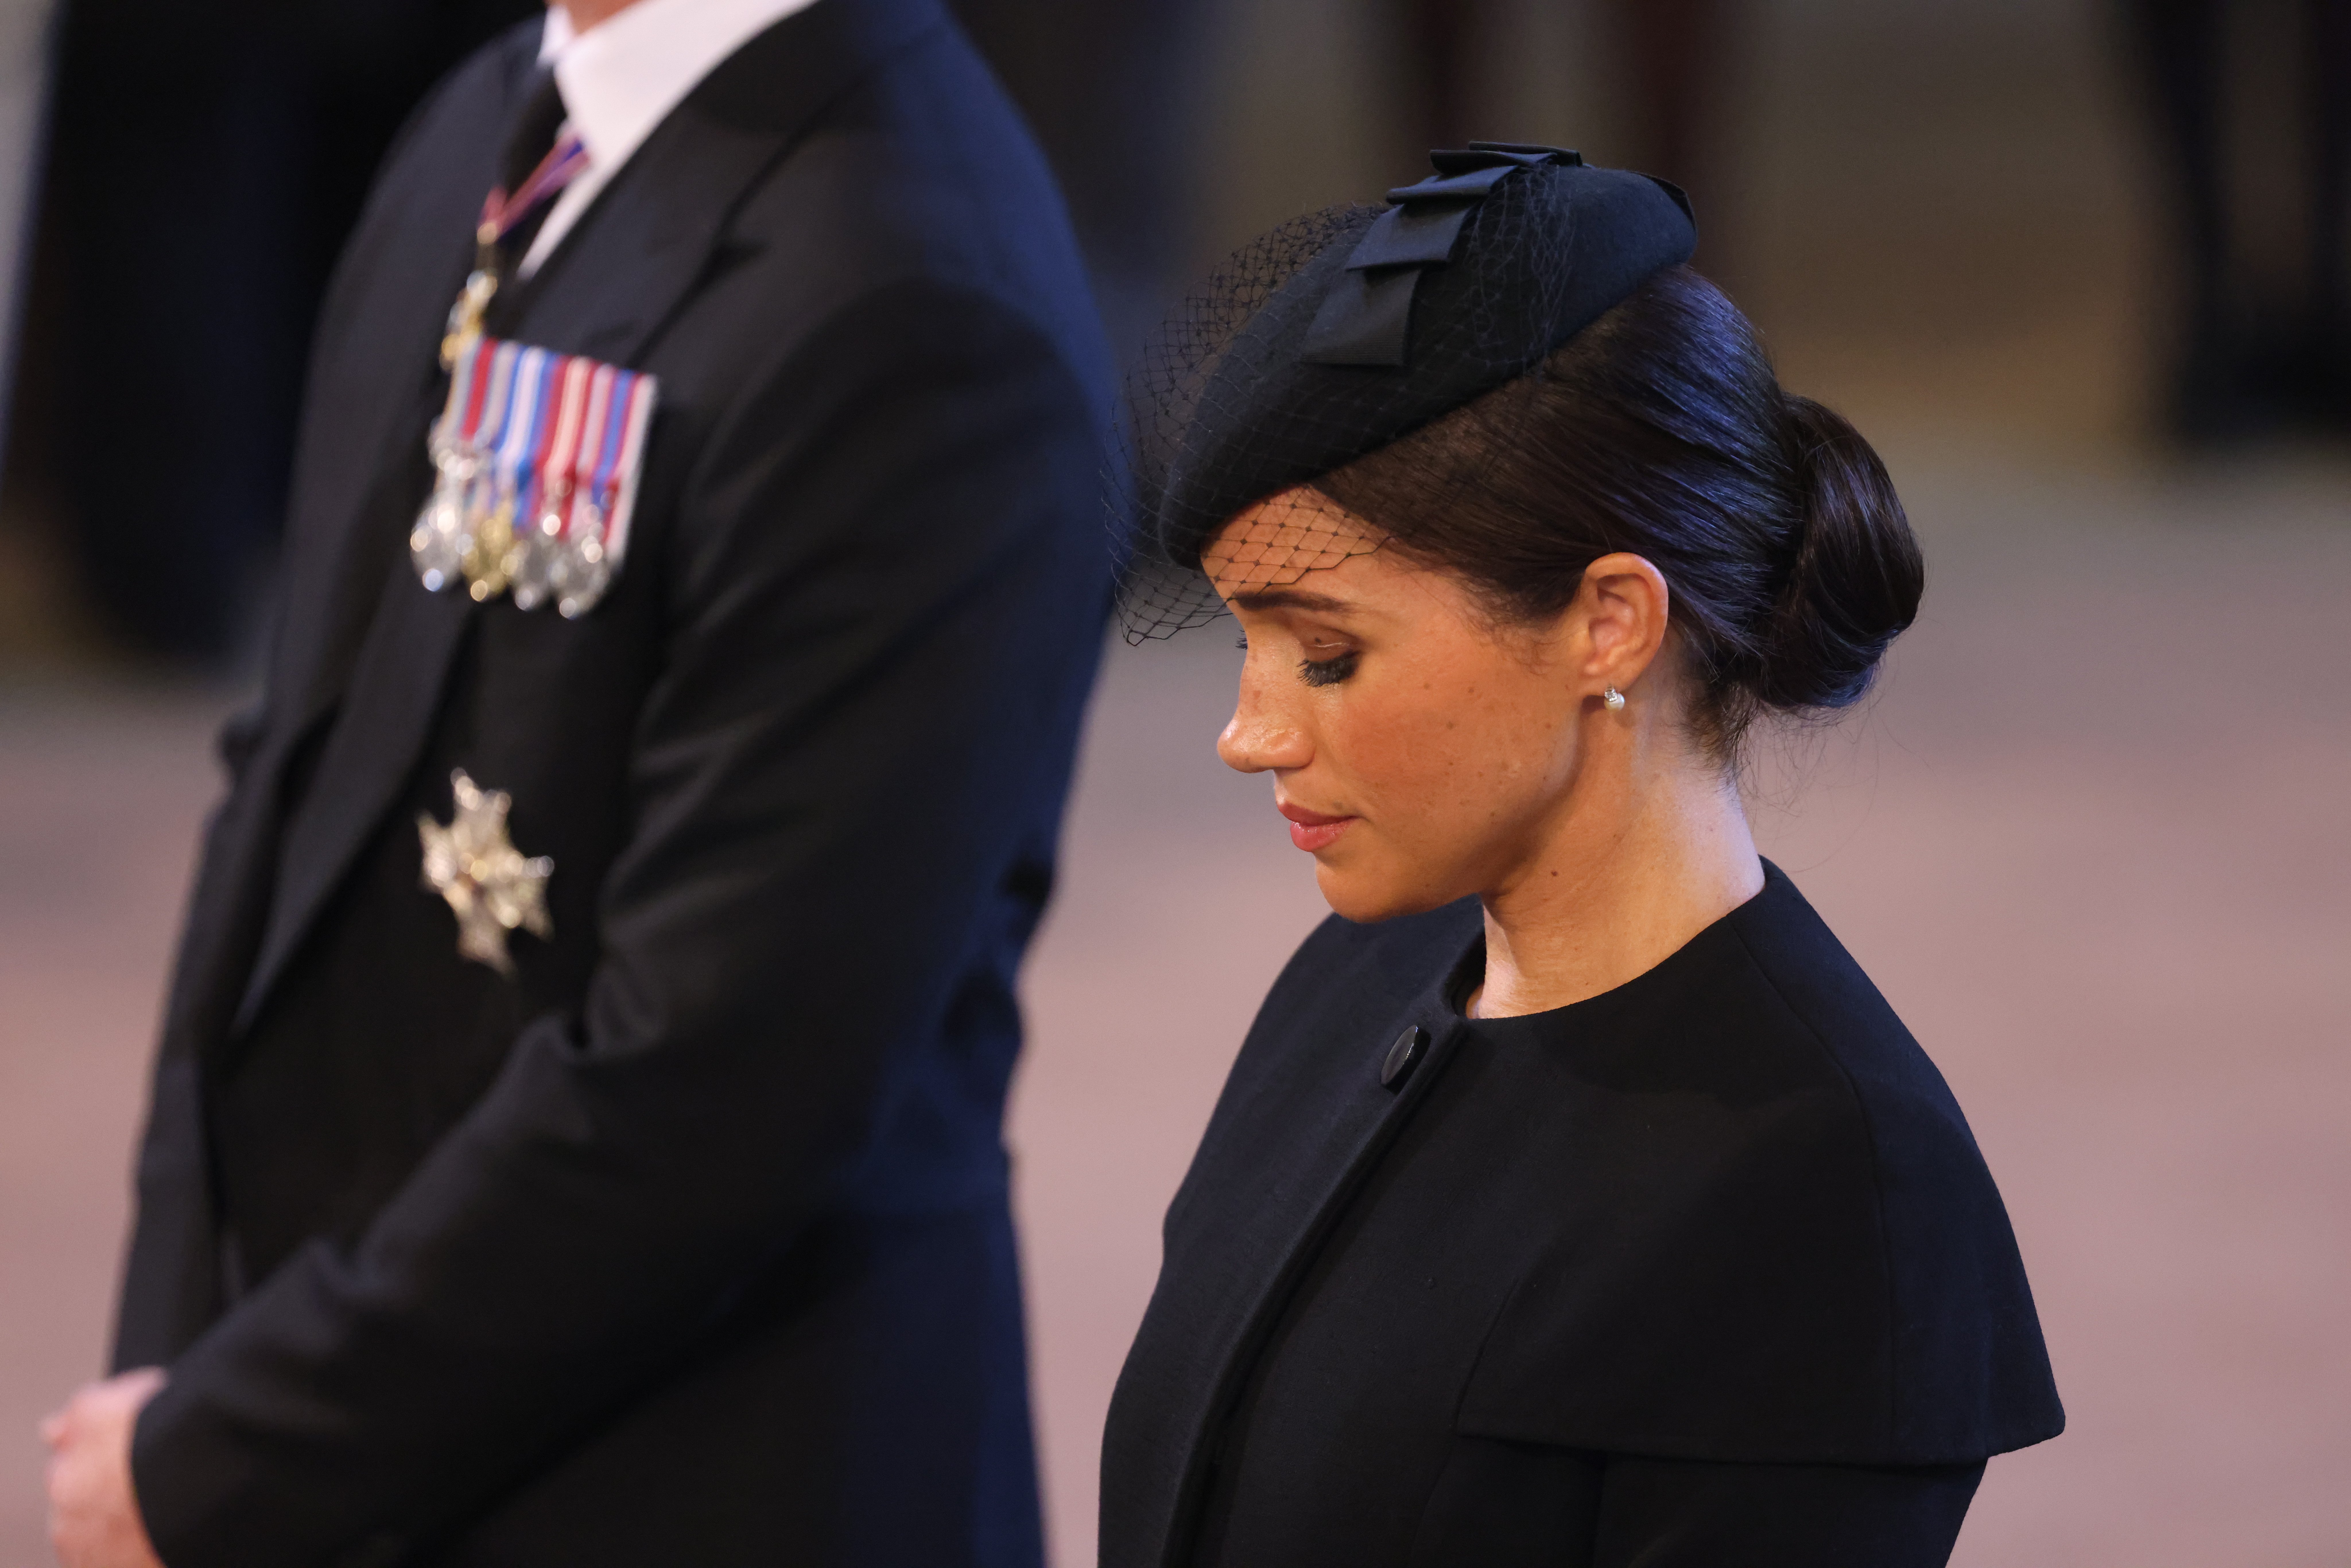 Duchess Meghan pays her respects as Queen Elizabeth II's coffin is brought into Westminster Hall on September 14, 2022, in London, the United Kingdom, on September 8, 2022 | Source: Getty Images